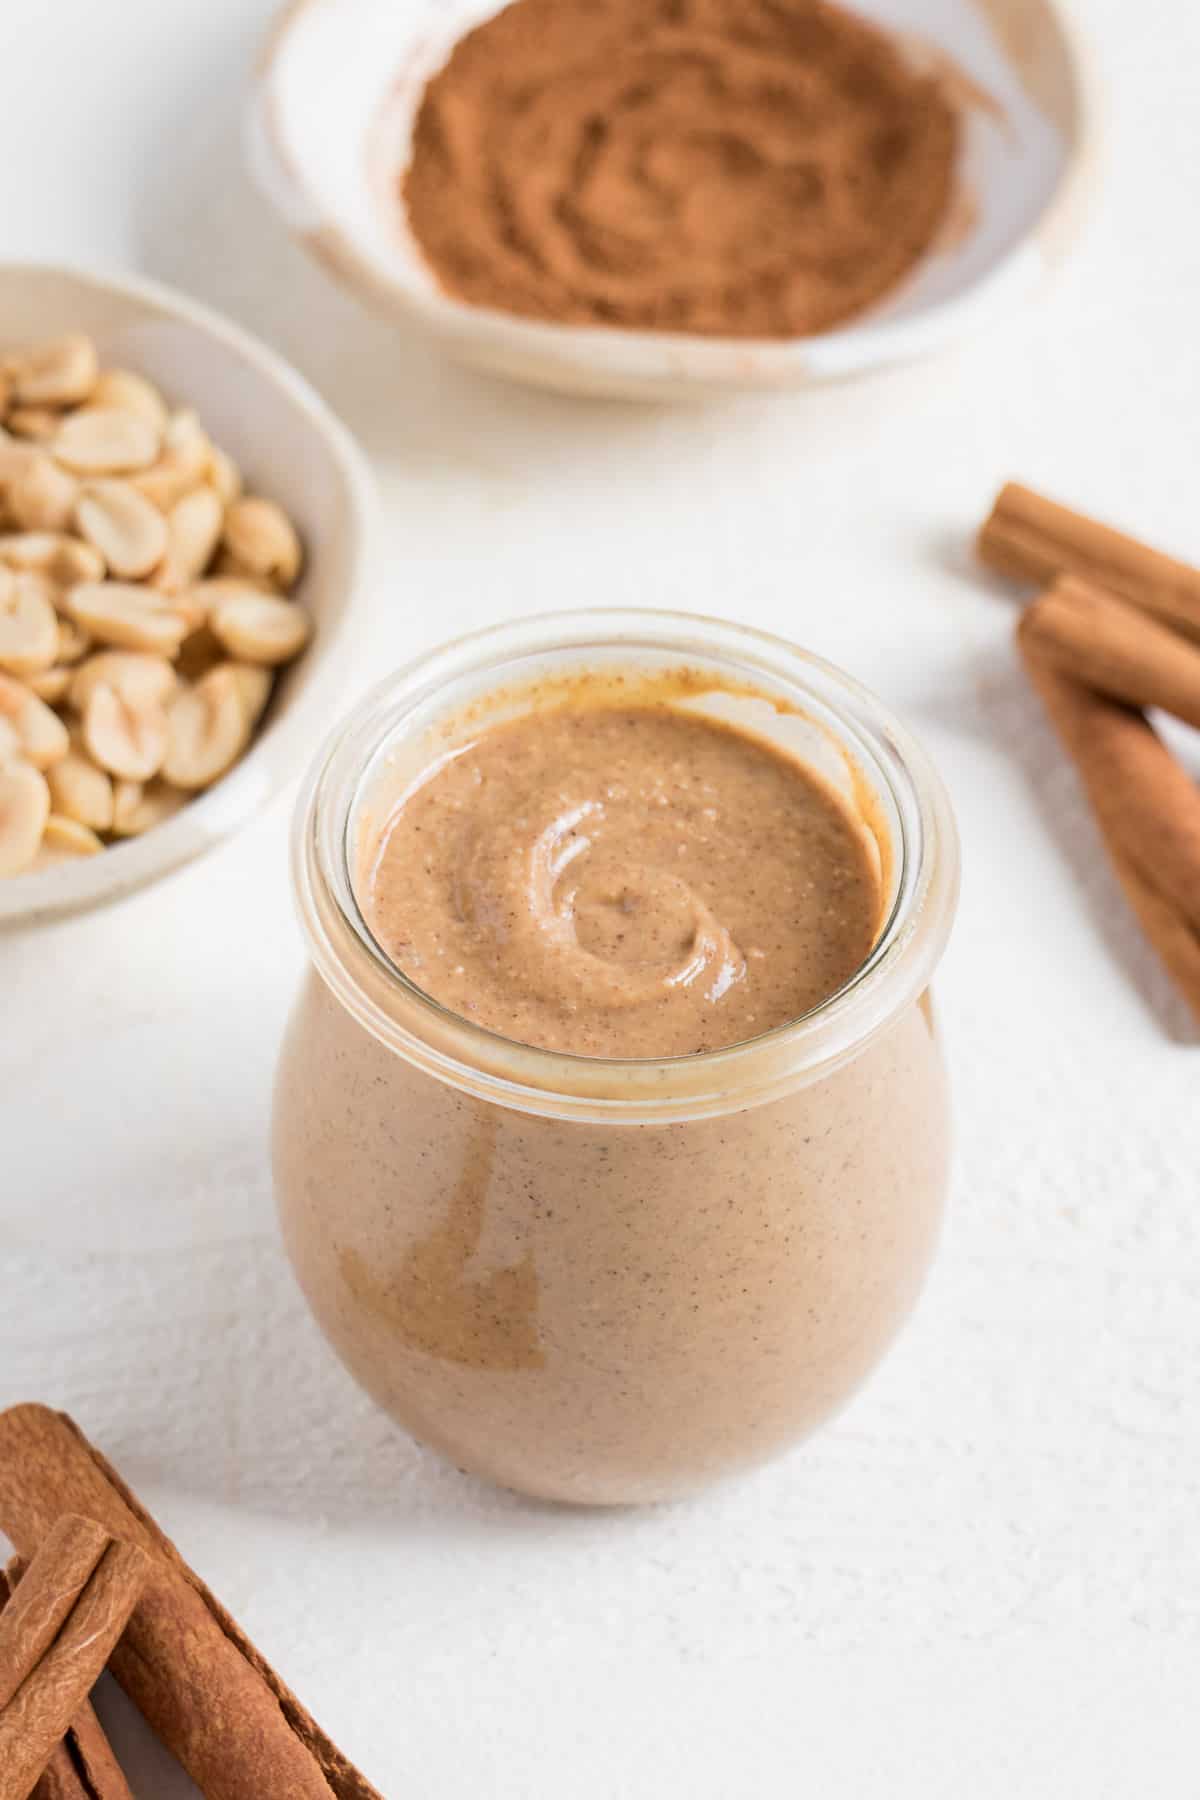 Homemade Peanut Butter - Purely Kaylie